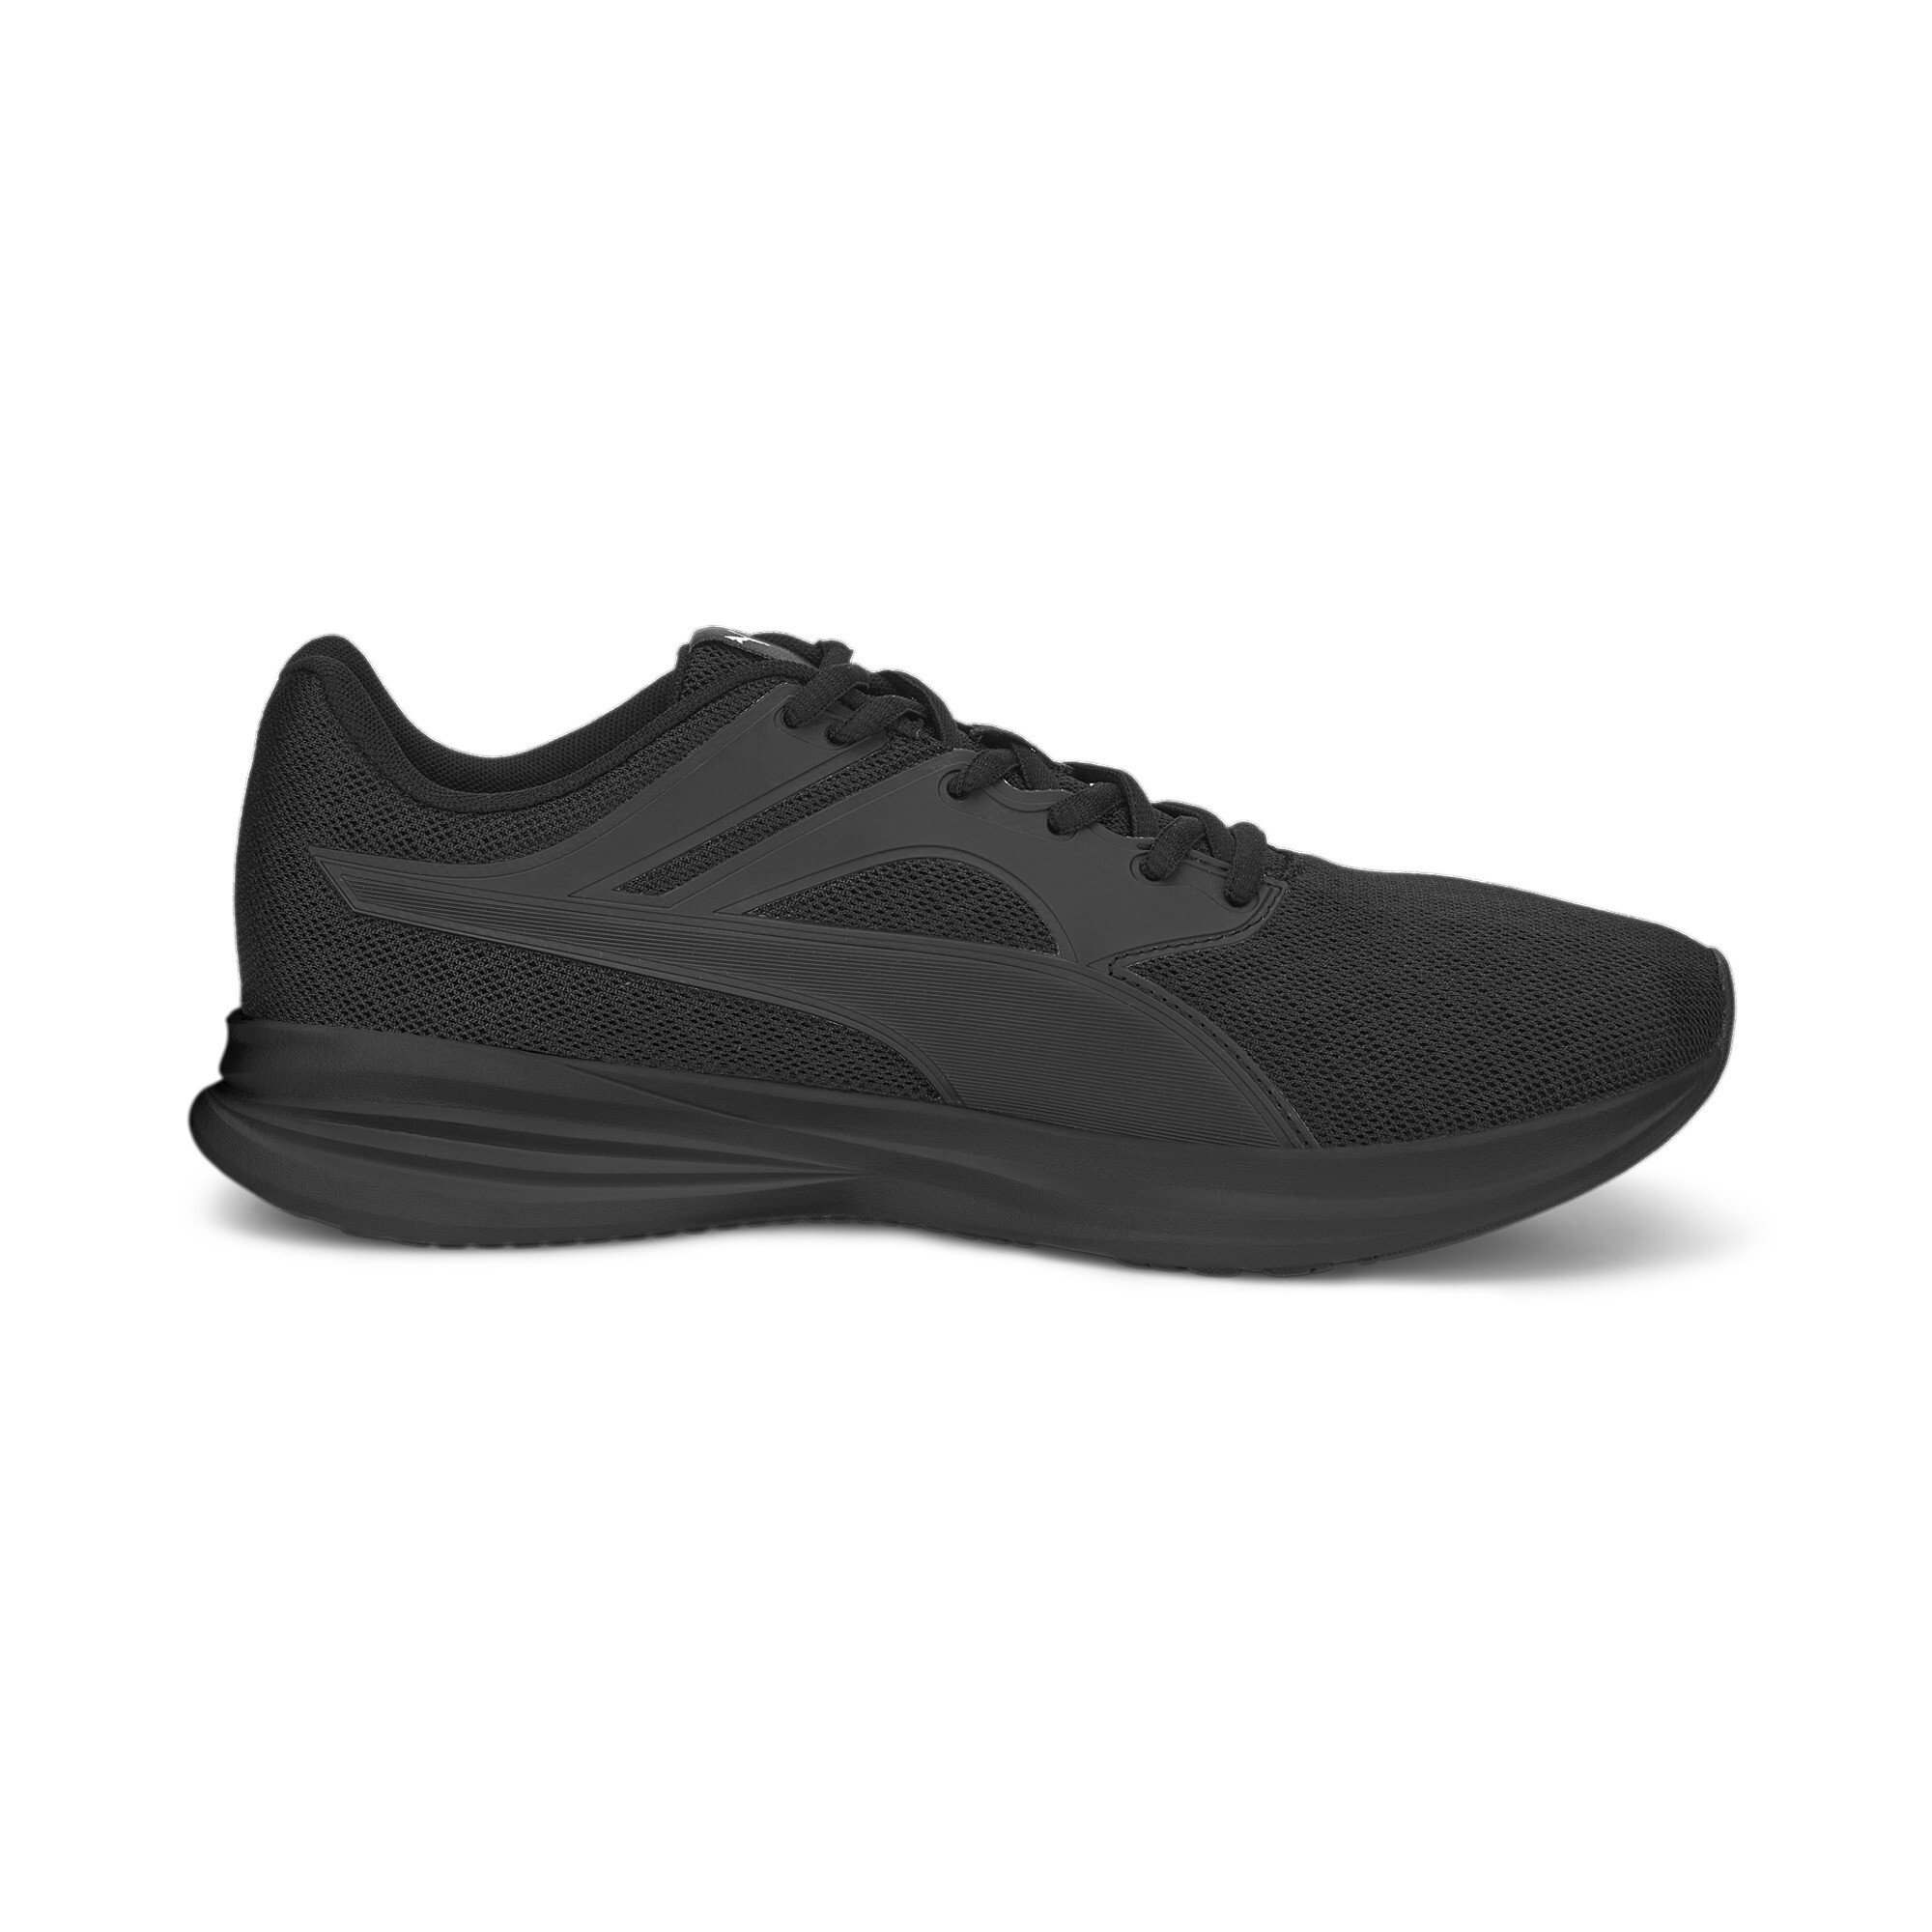 Puma Transport Running Shoes, Black, Size 35.5, Shoes